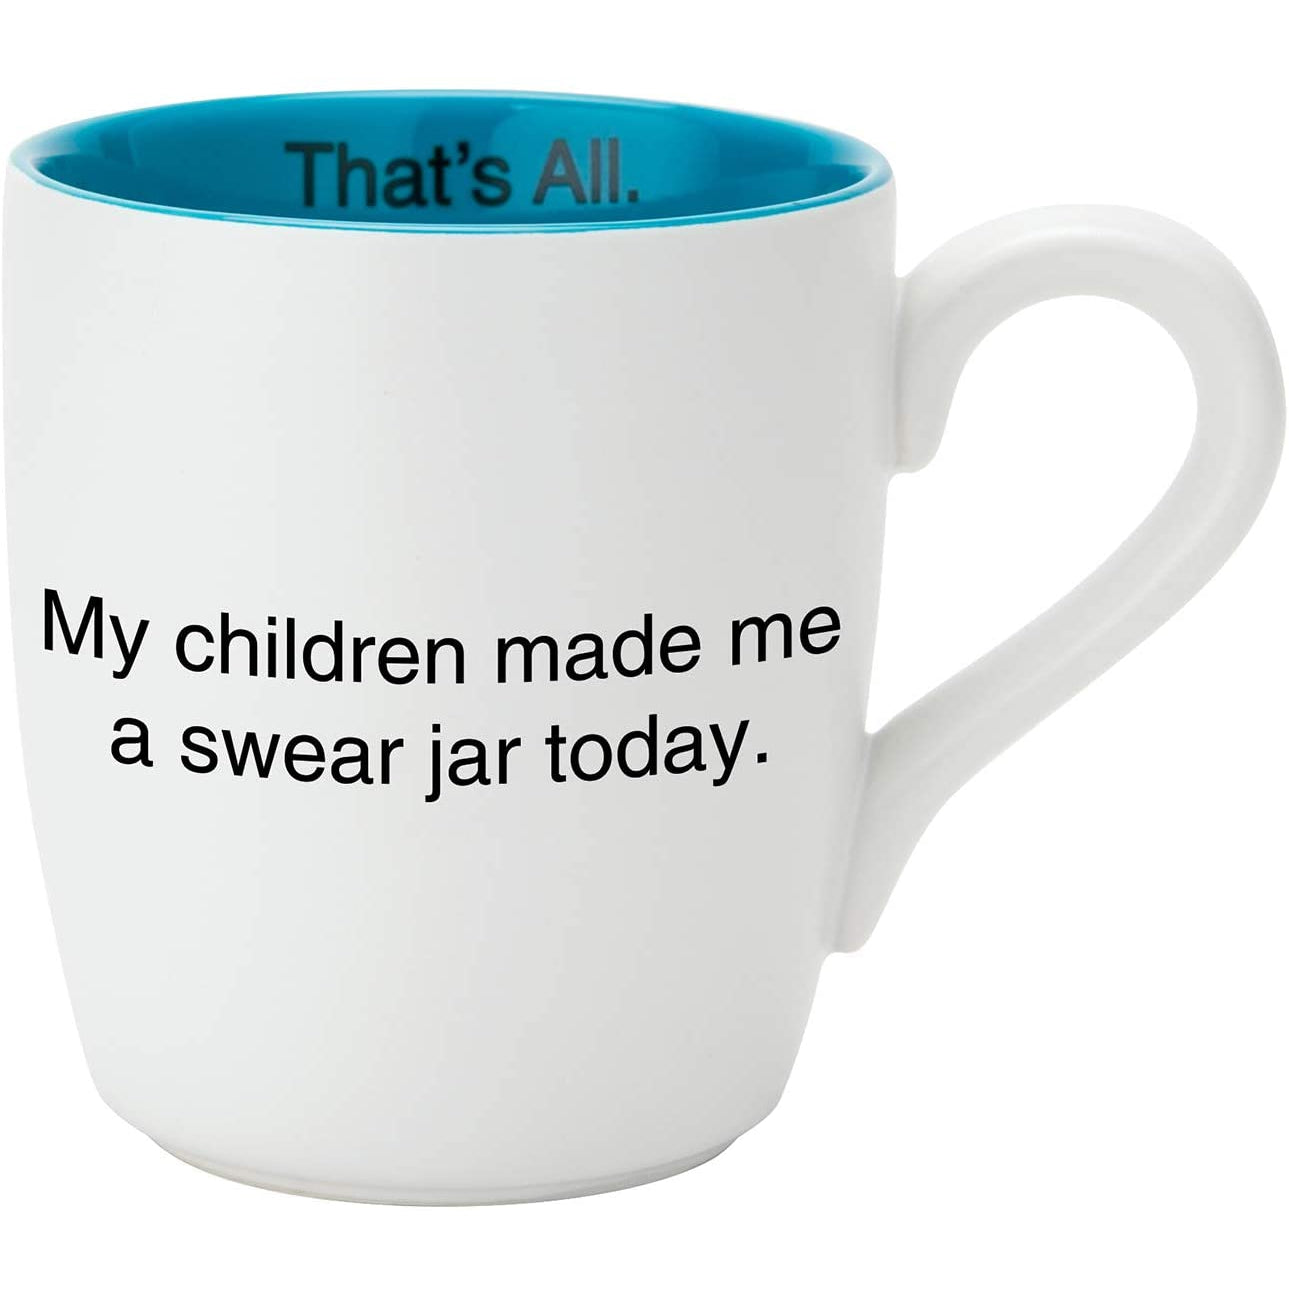 My Children Made Me A Swear Jar Today Ceramic Coffee Mug in Teal and White